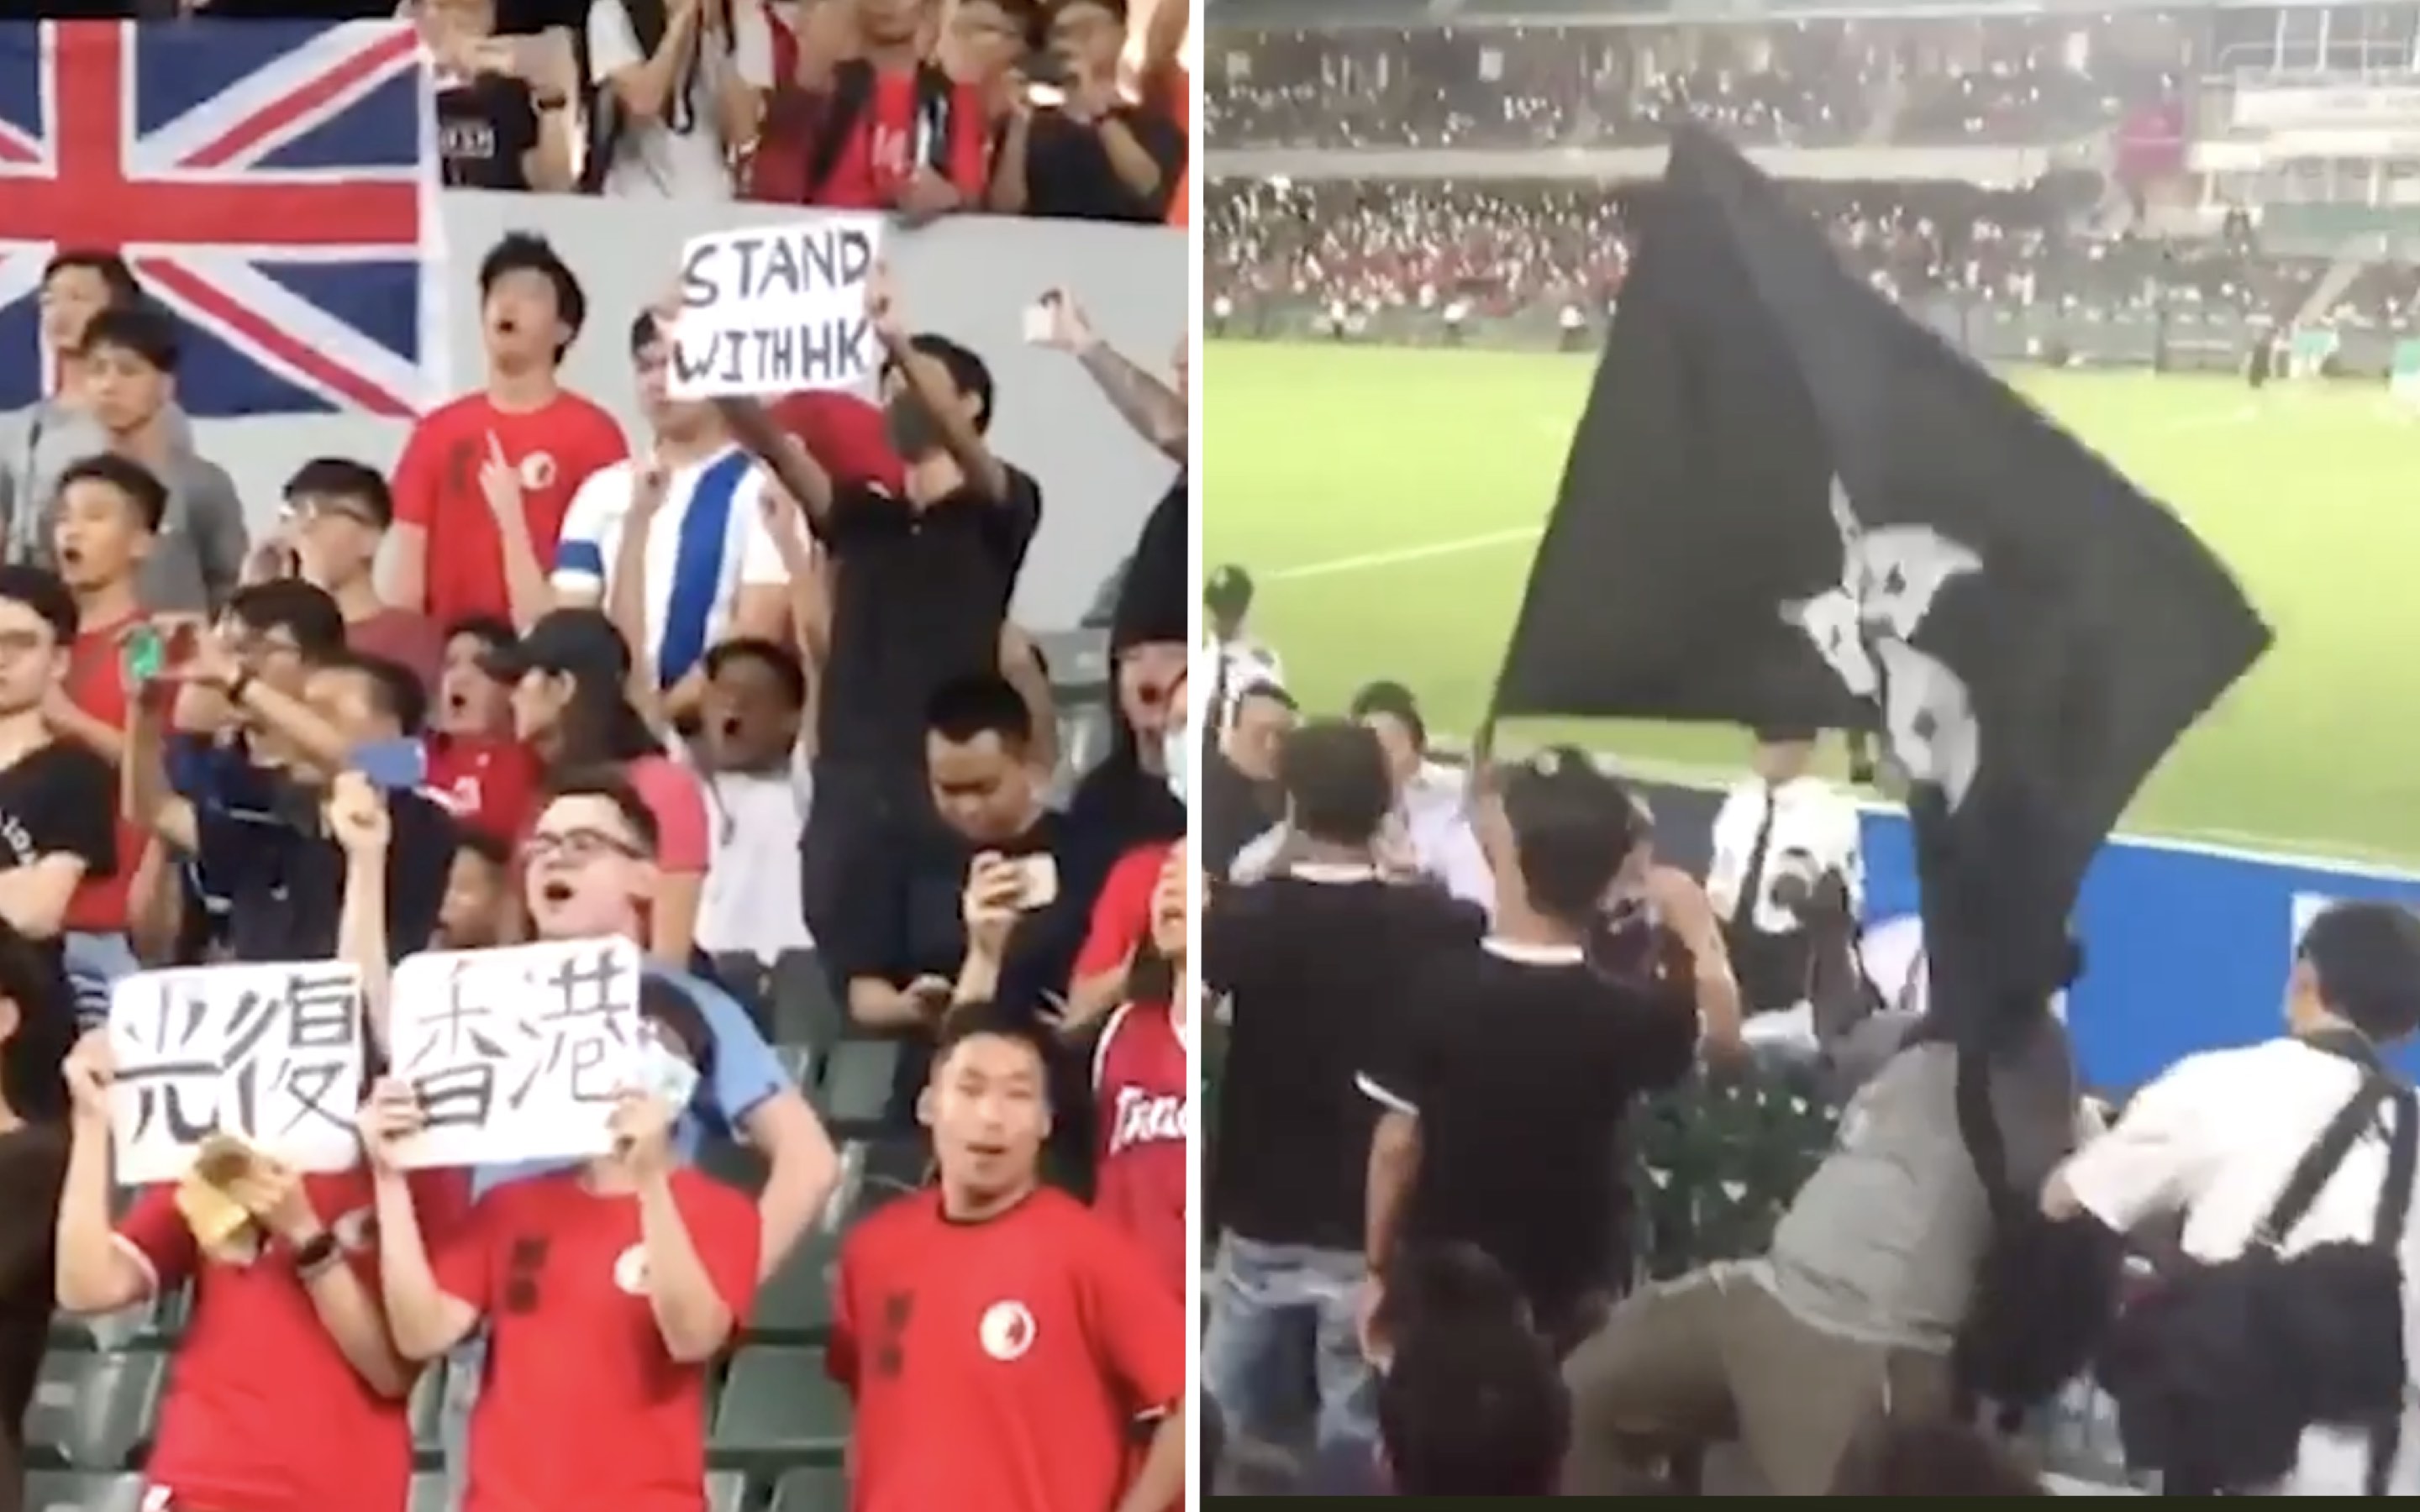 Fans boo and wave banners, flags and placards at a World Cup qualifying match between Hong Kong and Iran. Screengrab via Facebook/RTHK.